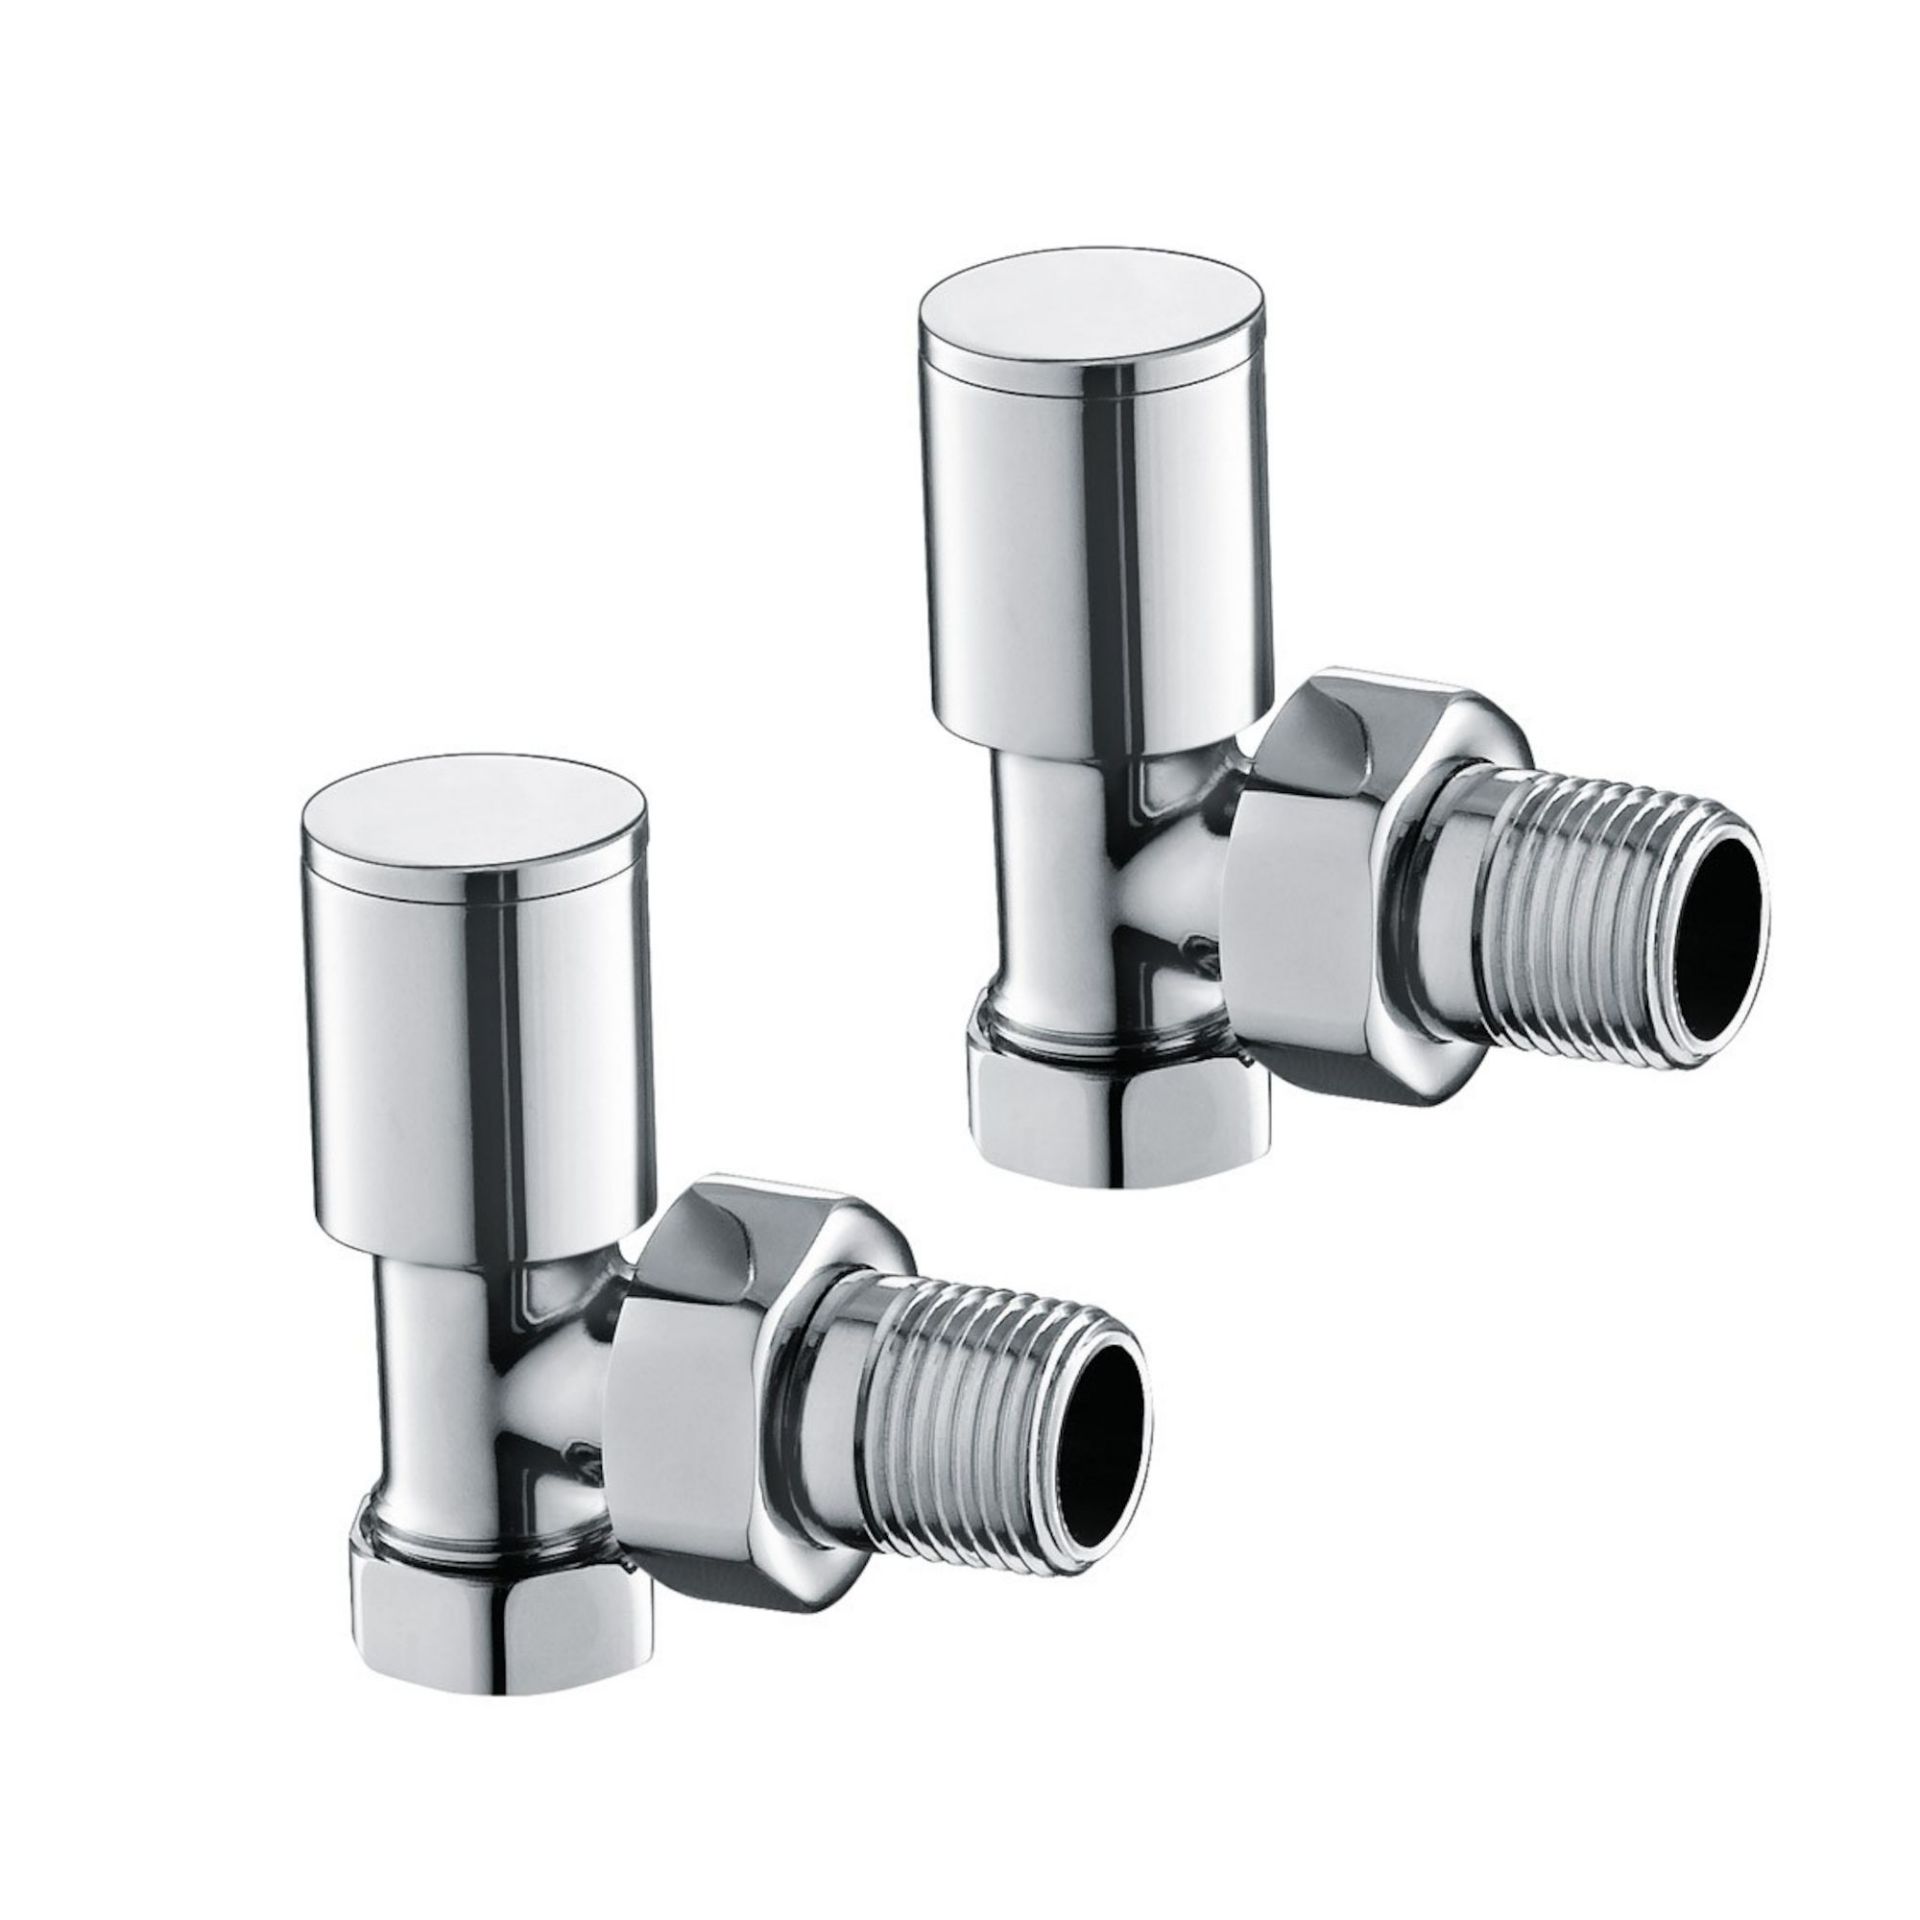 (YU1029) 15mm Standard Connection Angled Radiator Valves - Heavy Duty Polished Chrome Plated Br... - Image 2 of 3